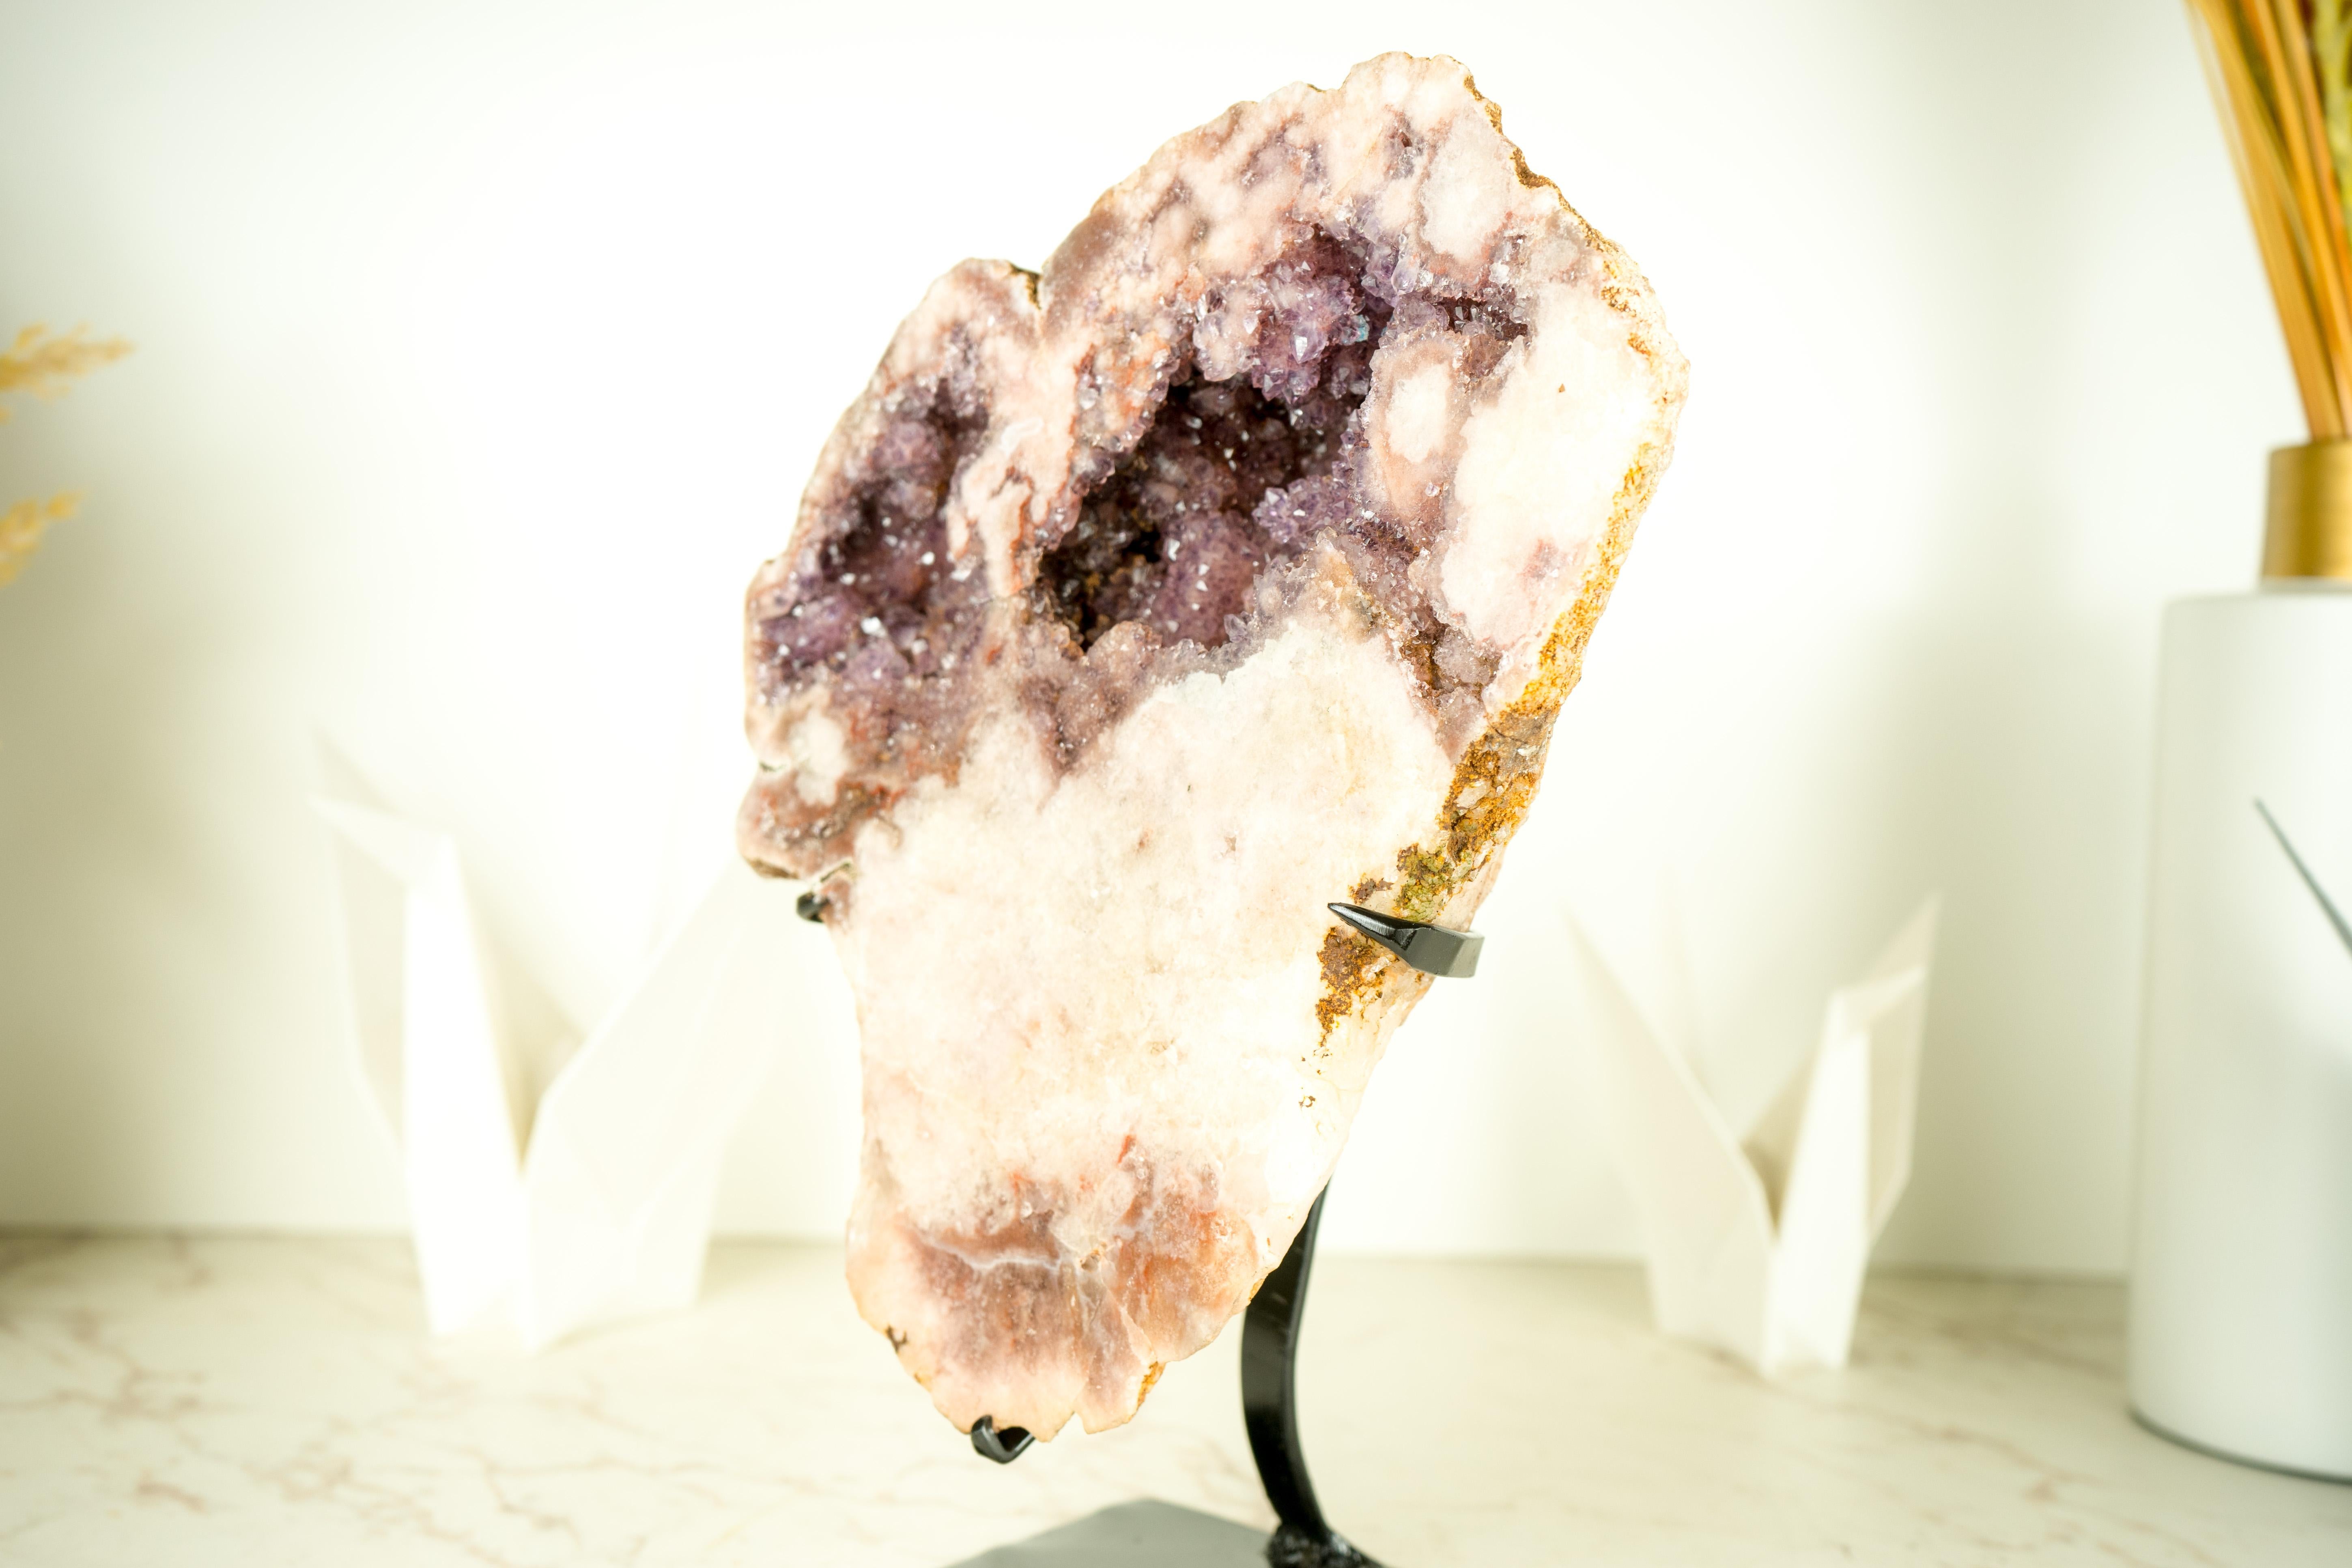 Agate High-Grade Pink Amethyst Geode with Sparkly Lavender Rose Amethyst Druzy  For Sale